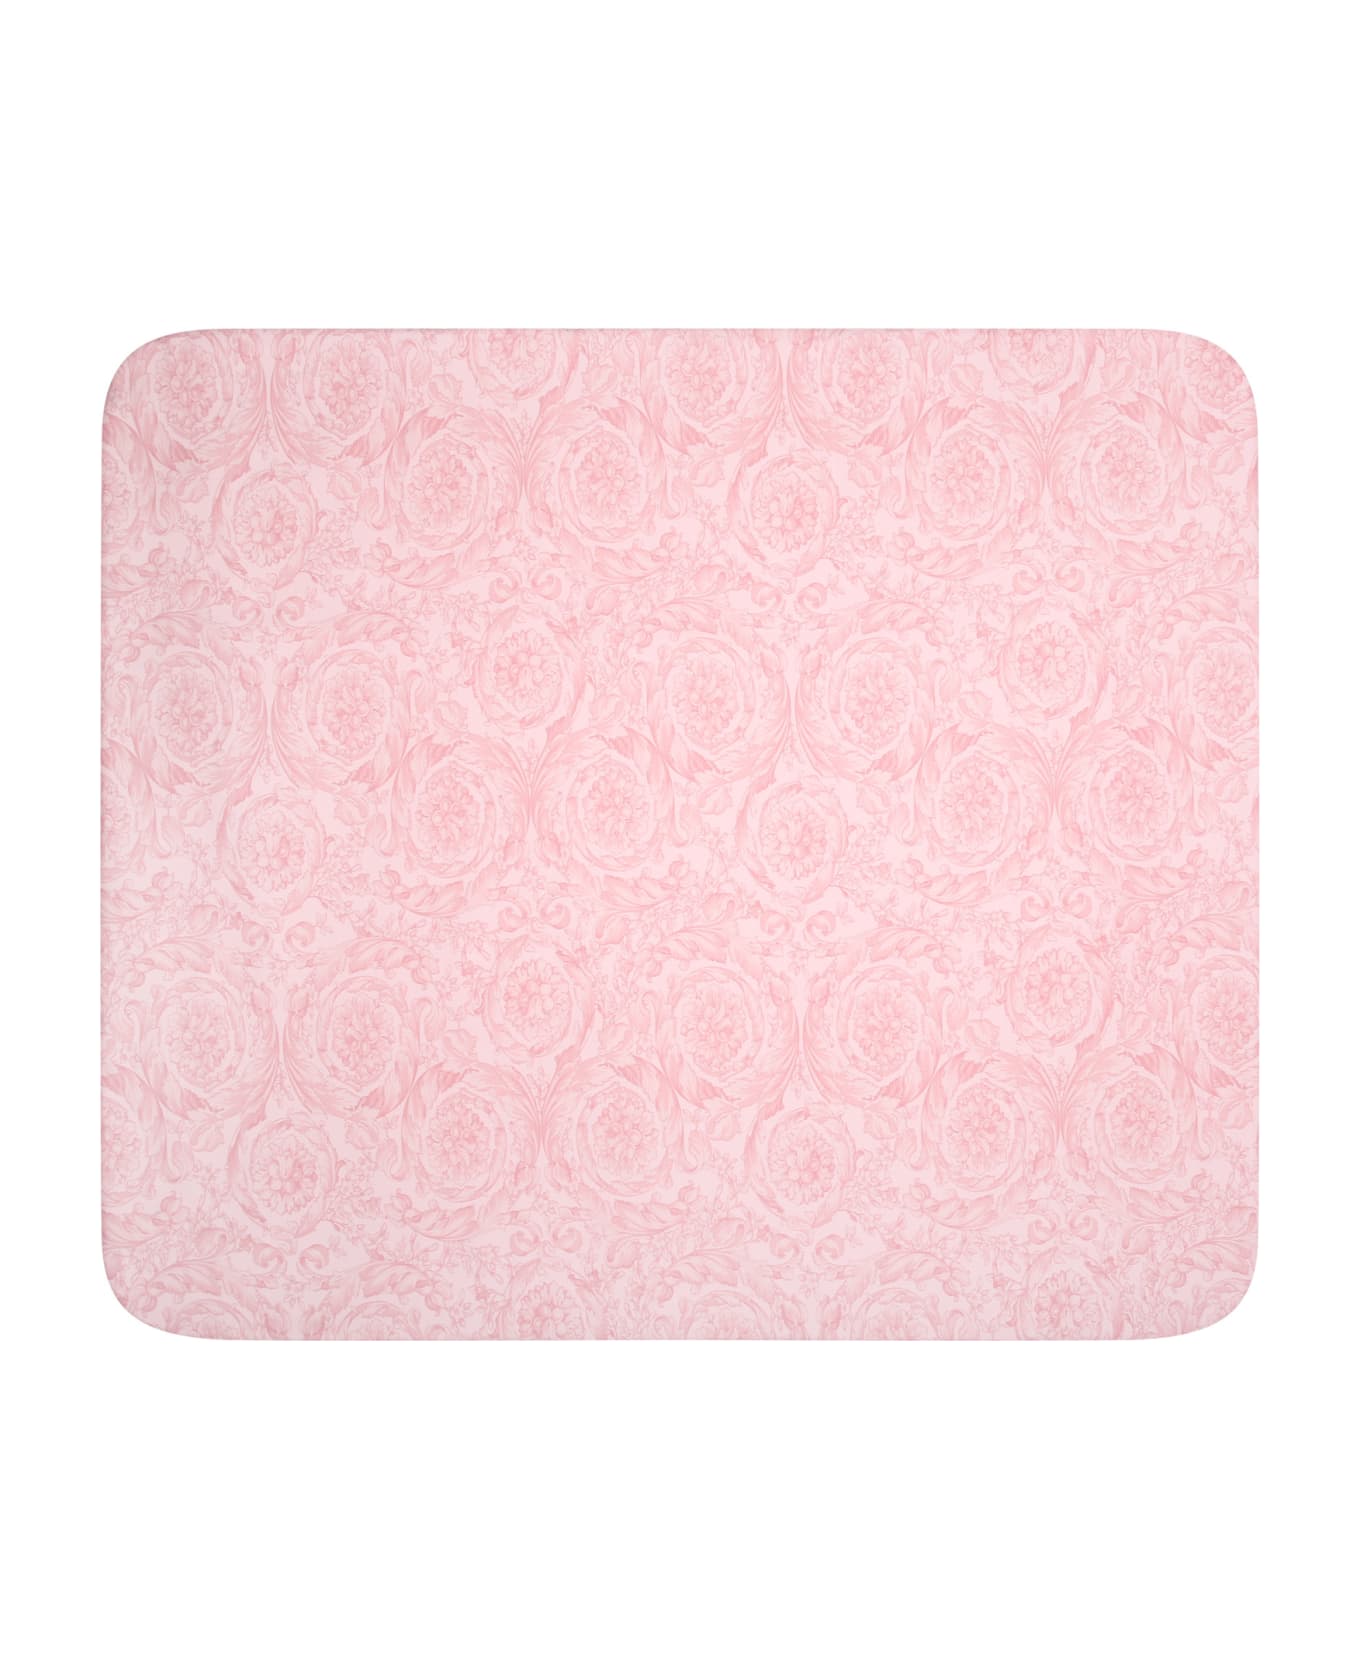 Versace Pink Baby Girl Blanket With Baroque Print - Pink アクセサリー＆ギフト